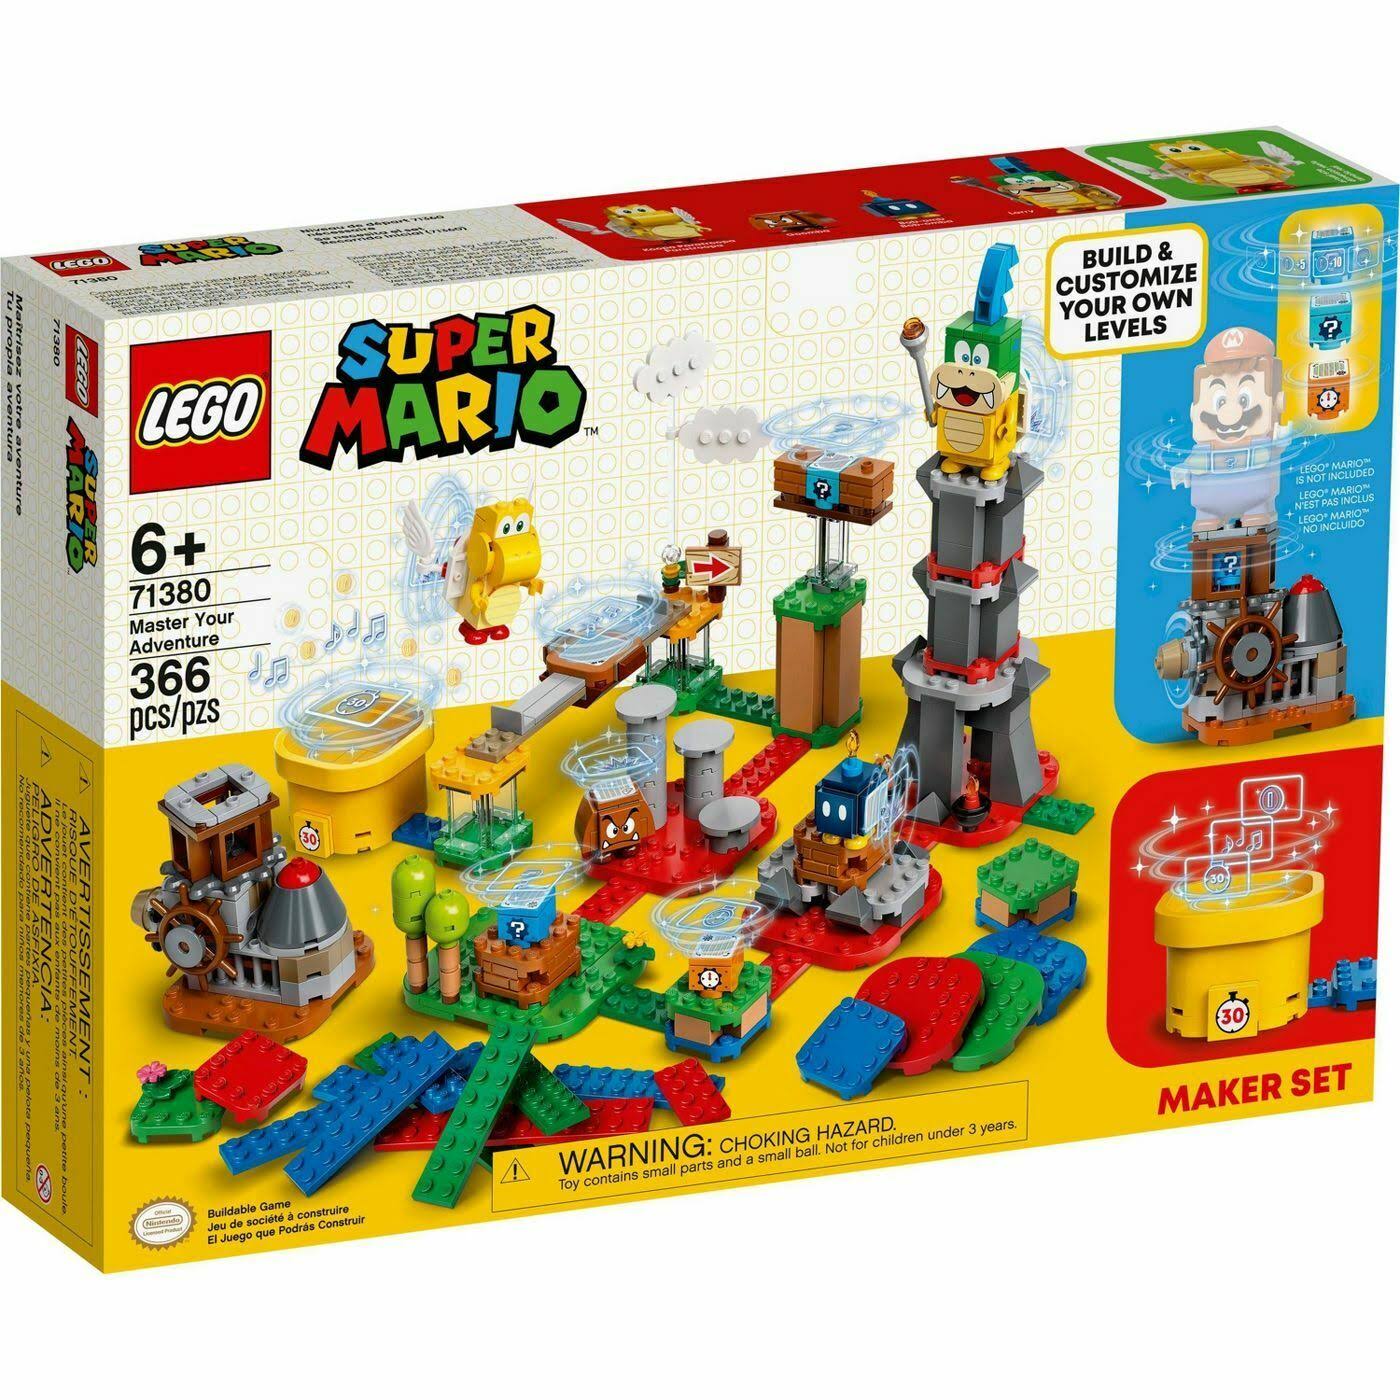 Lego 71380 Super Mario Master Your Adventure Maker Set New with Sealed Box